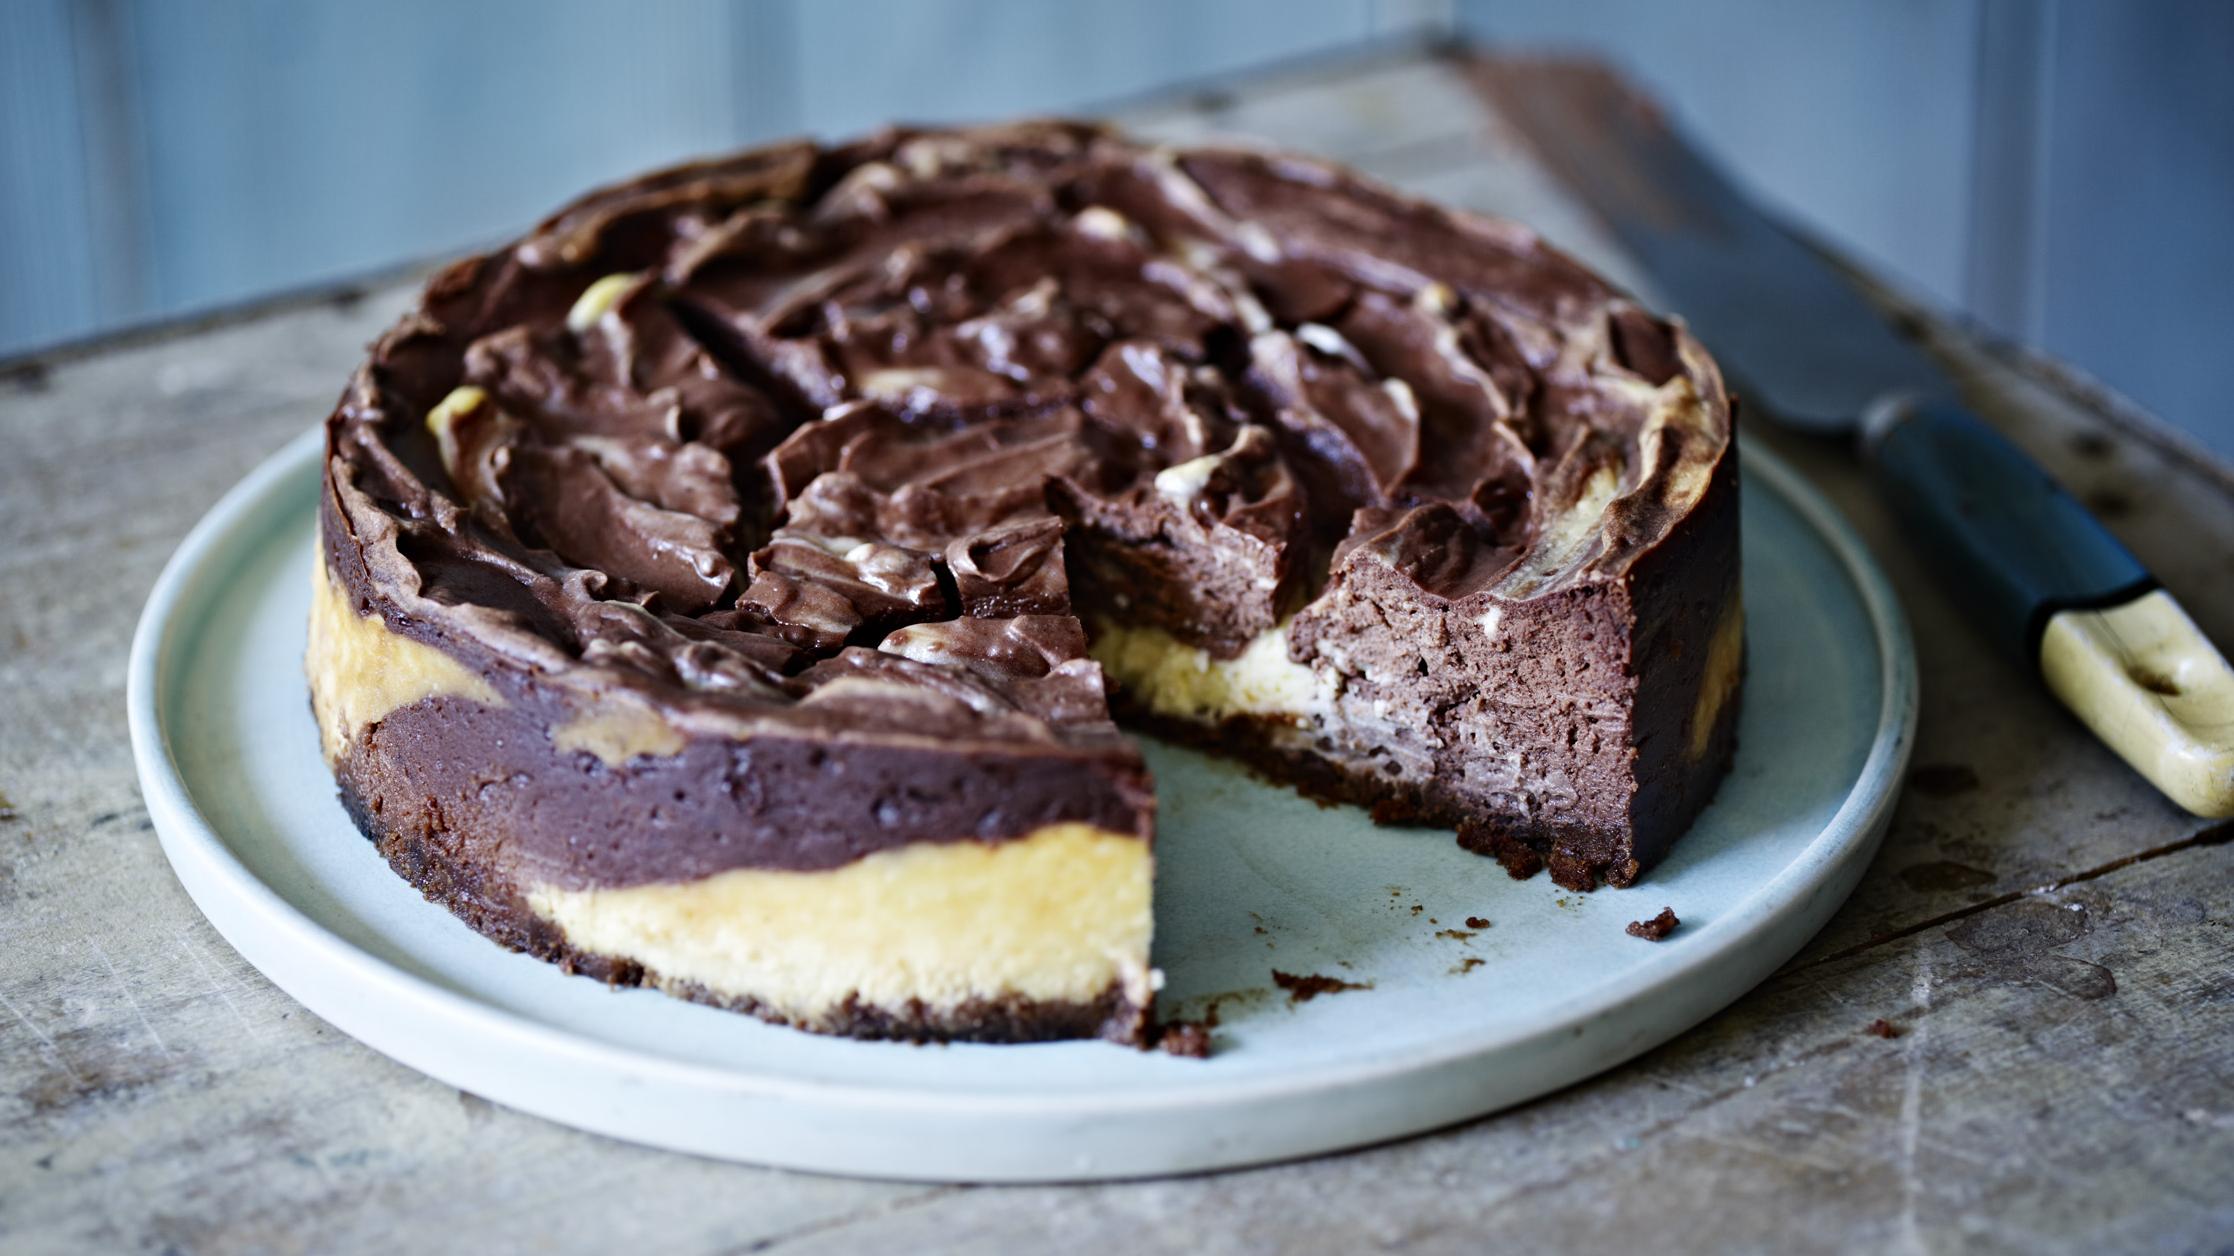  Perfect for chocoholics and cheesecake lovers alike